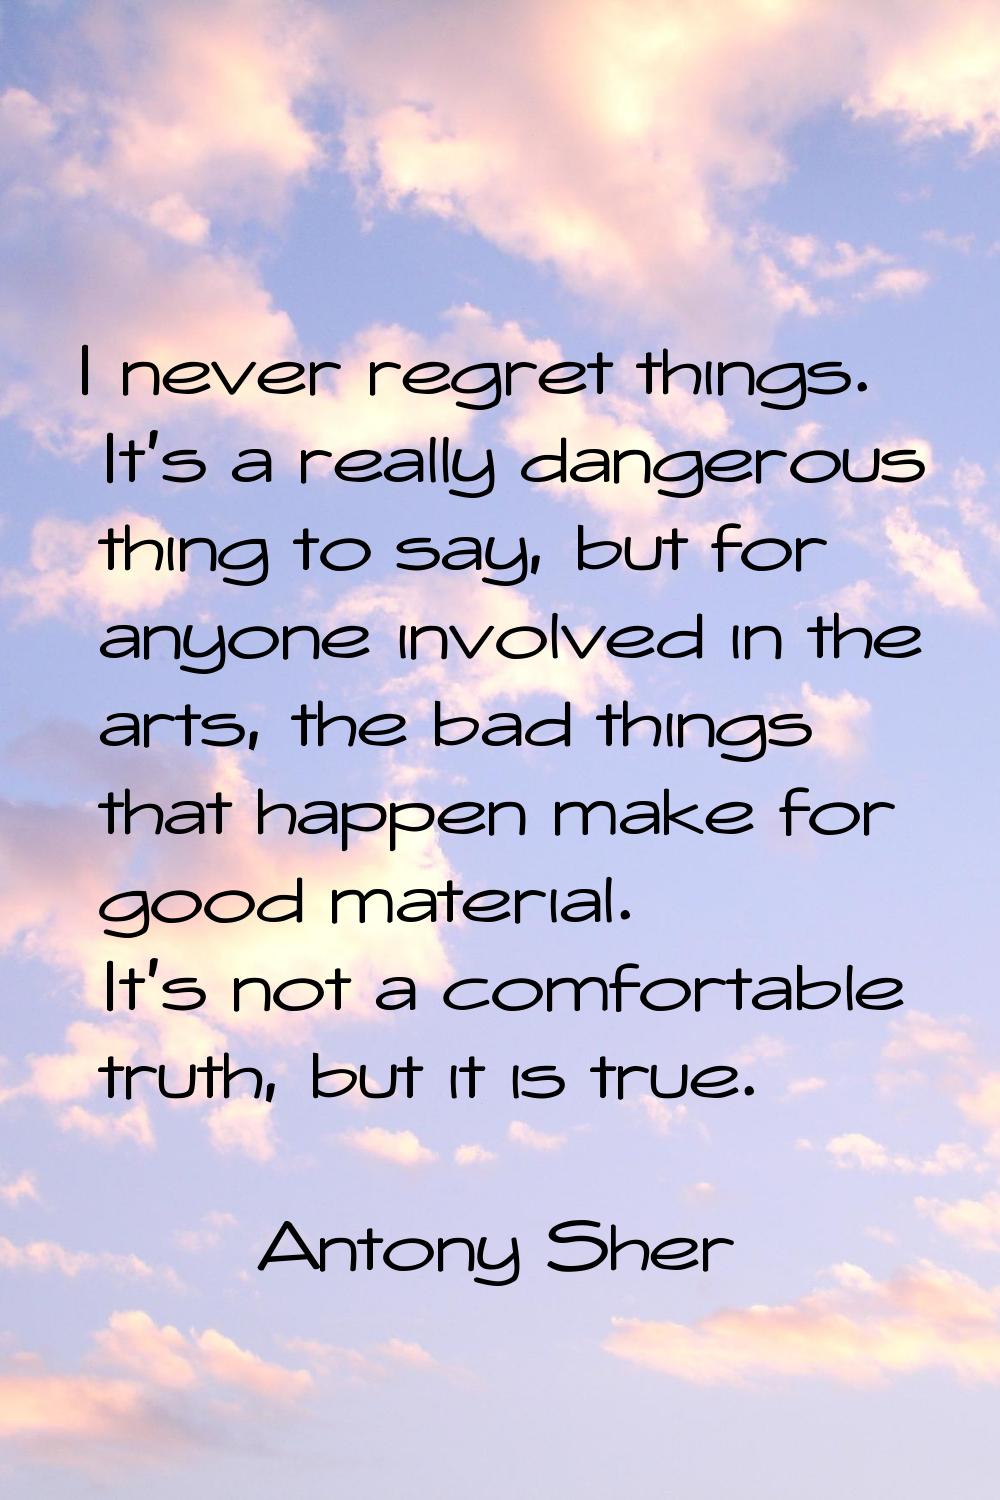 I never regret things. It's a really dangerous thing to say, but for anyone involved in the arts, t